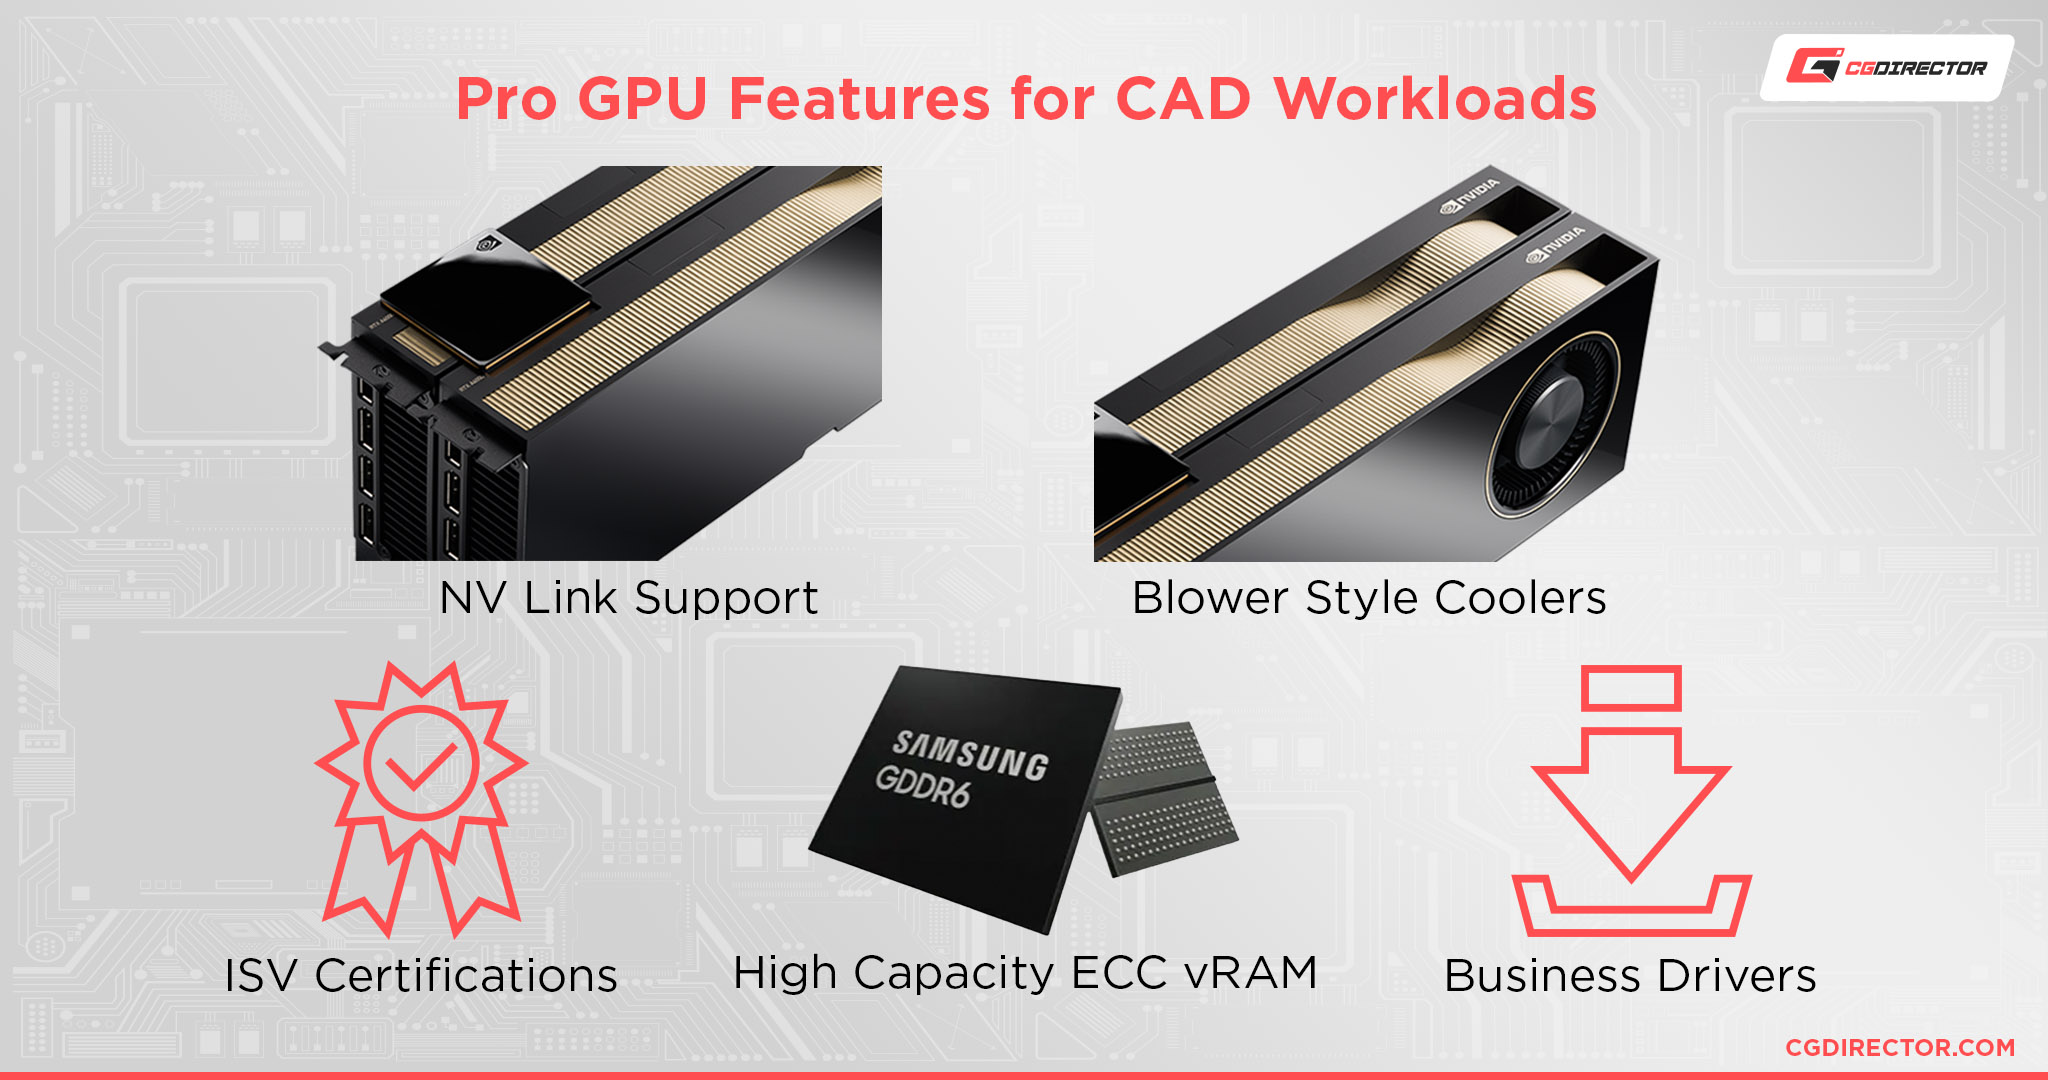 Pro GPU Features for CAD Workloads